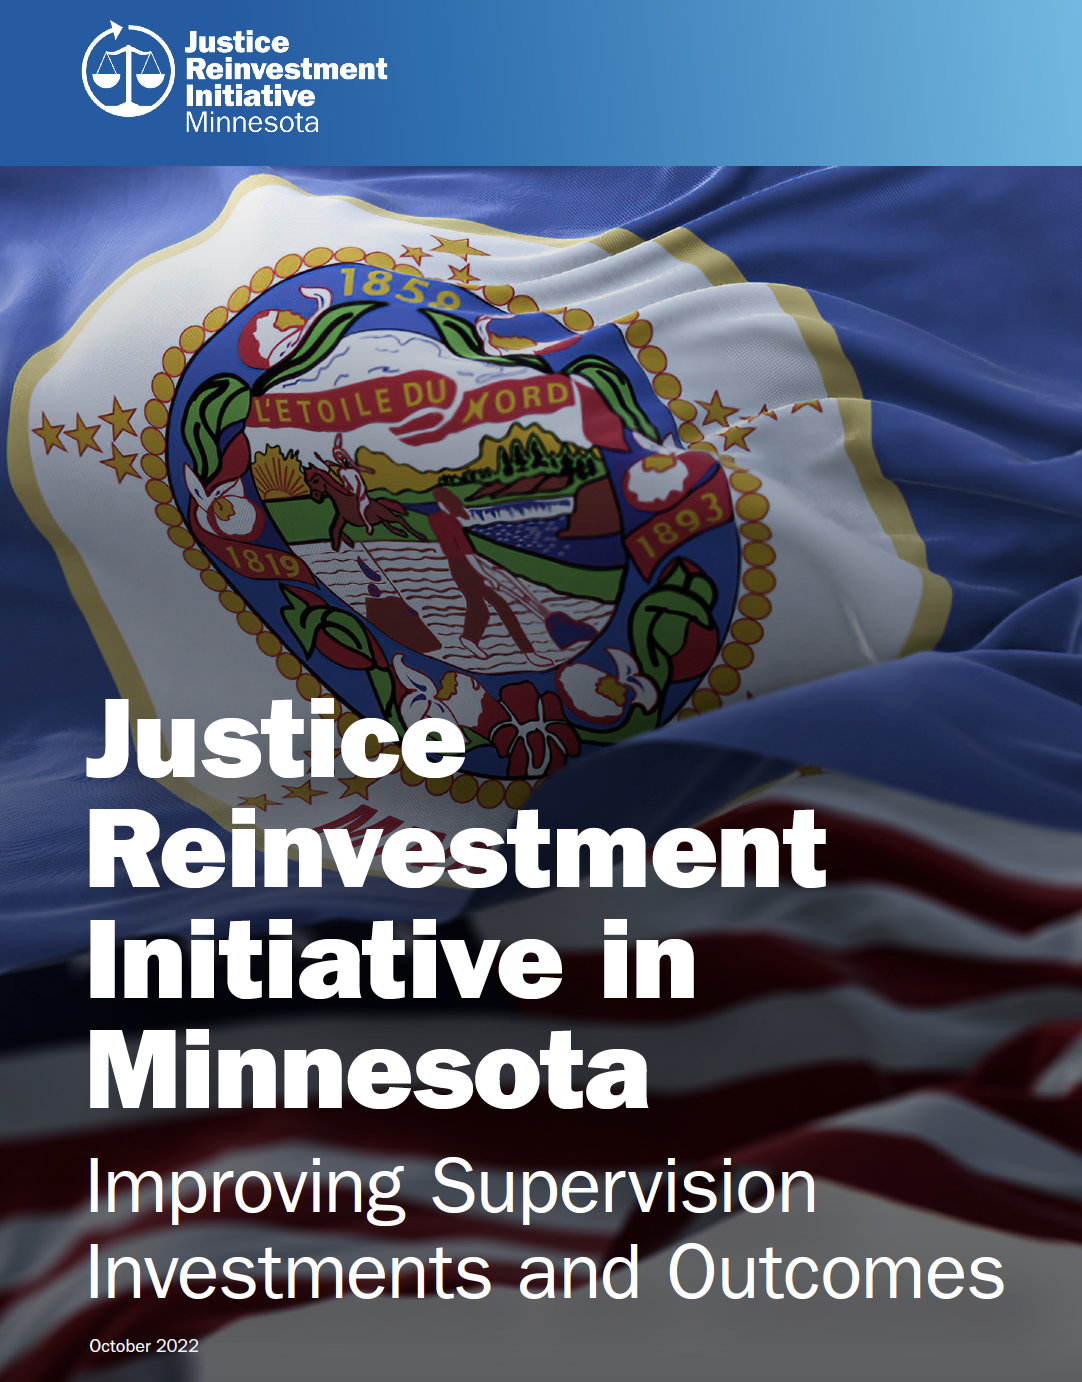 Justice Reinvestment Initiative in Minnesota: Improving Supervision Investments and Outcomes